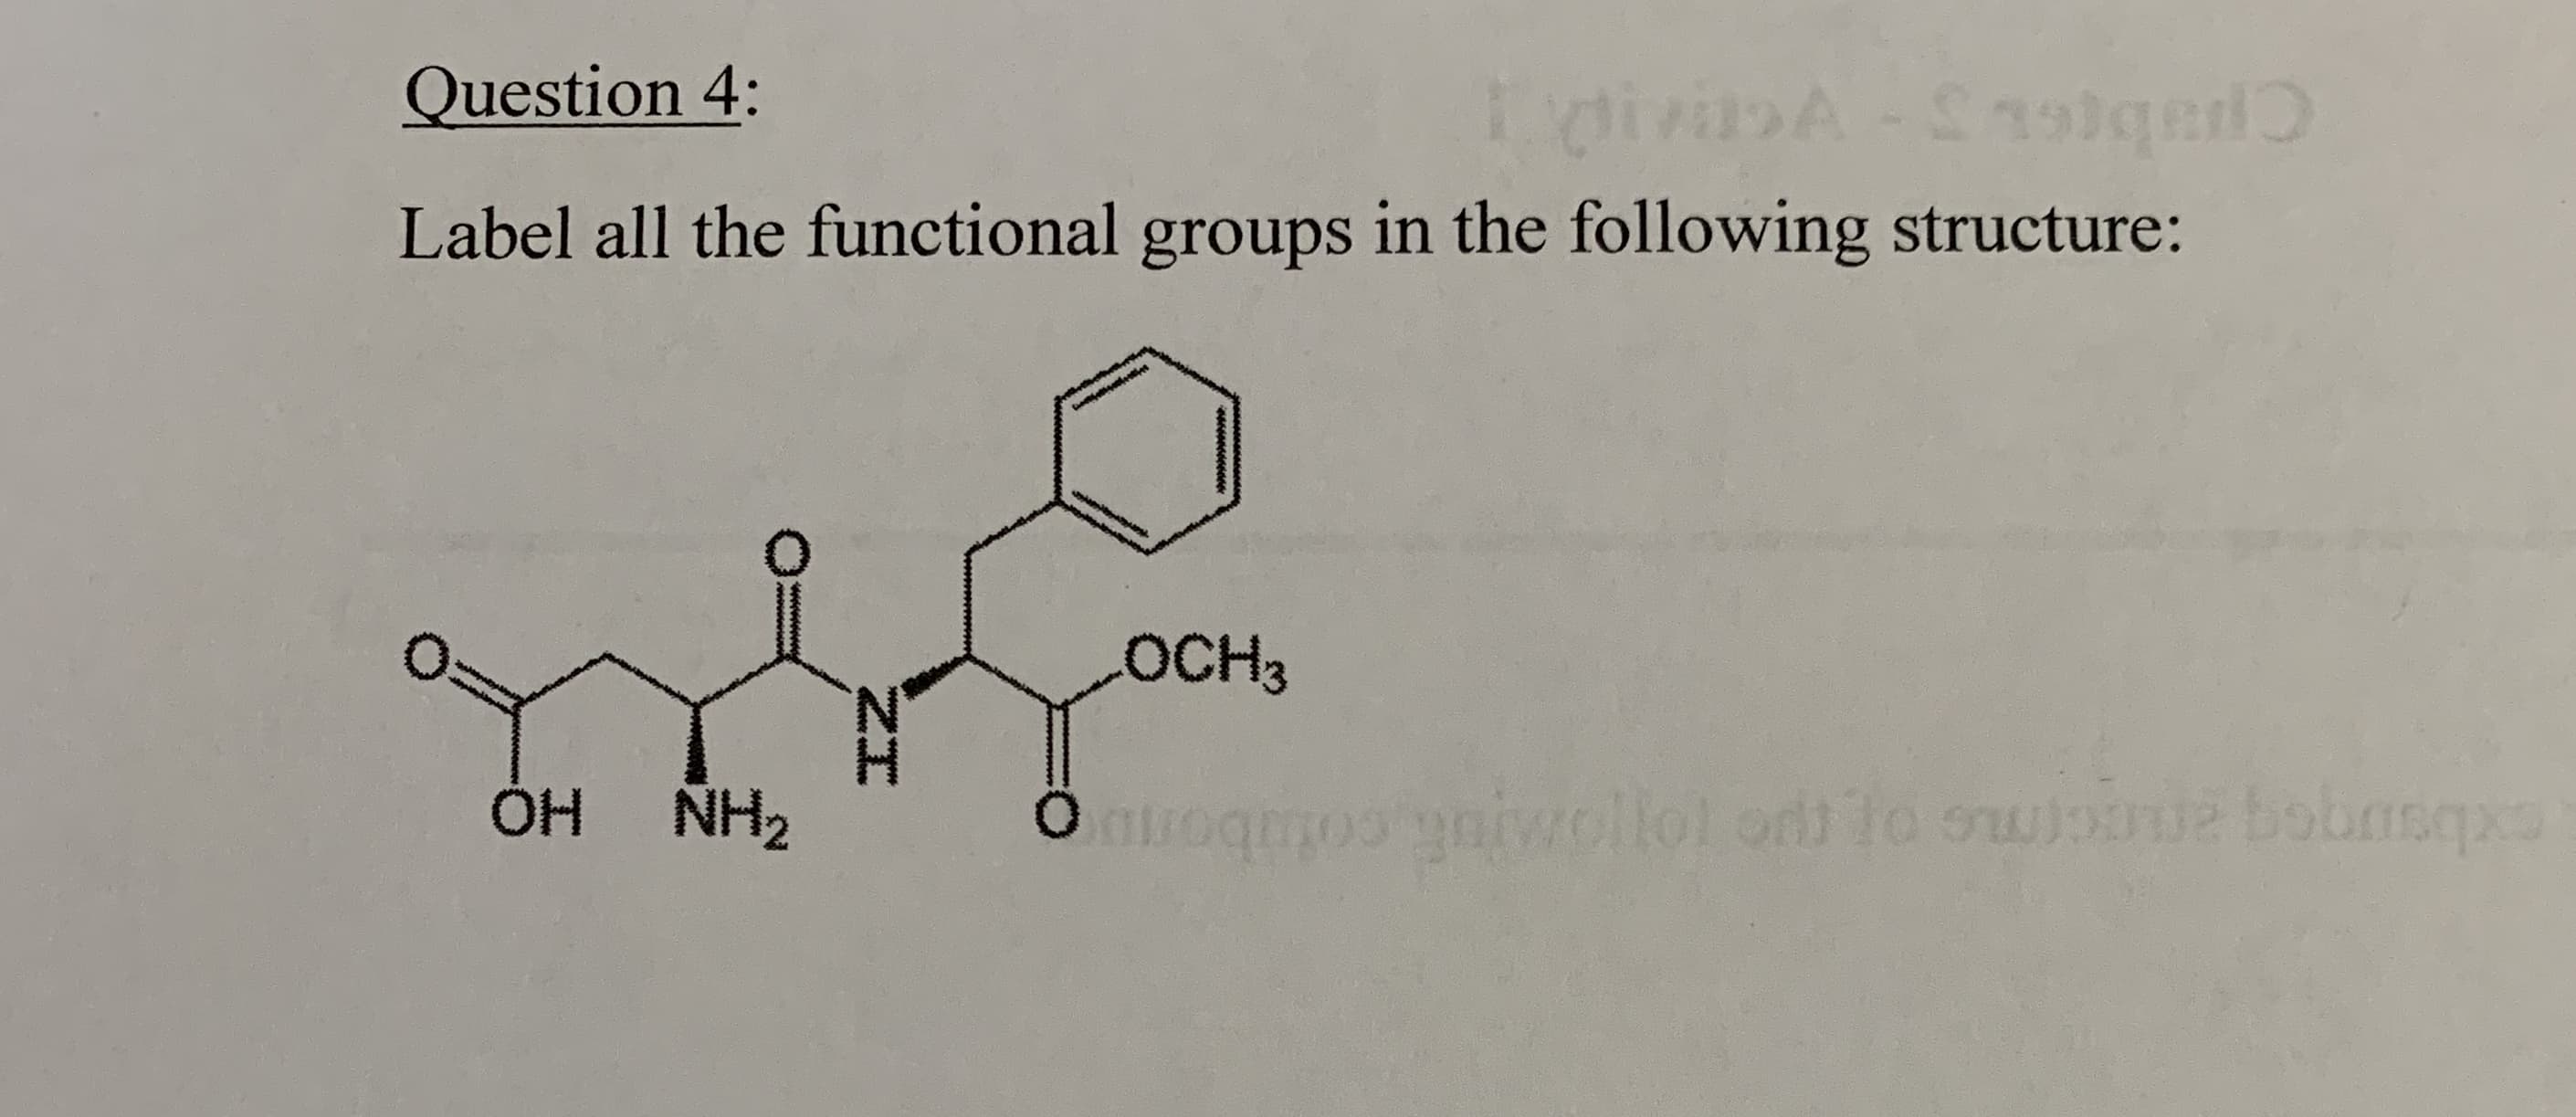 Question 4:
A-S
Label all the functional groups in the following structure:
OCH3
ÓH NH2
wollol ordt to owio
wwww
